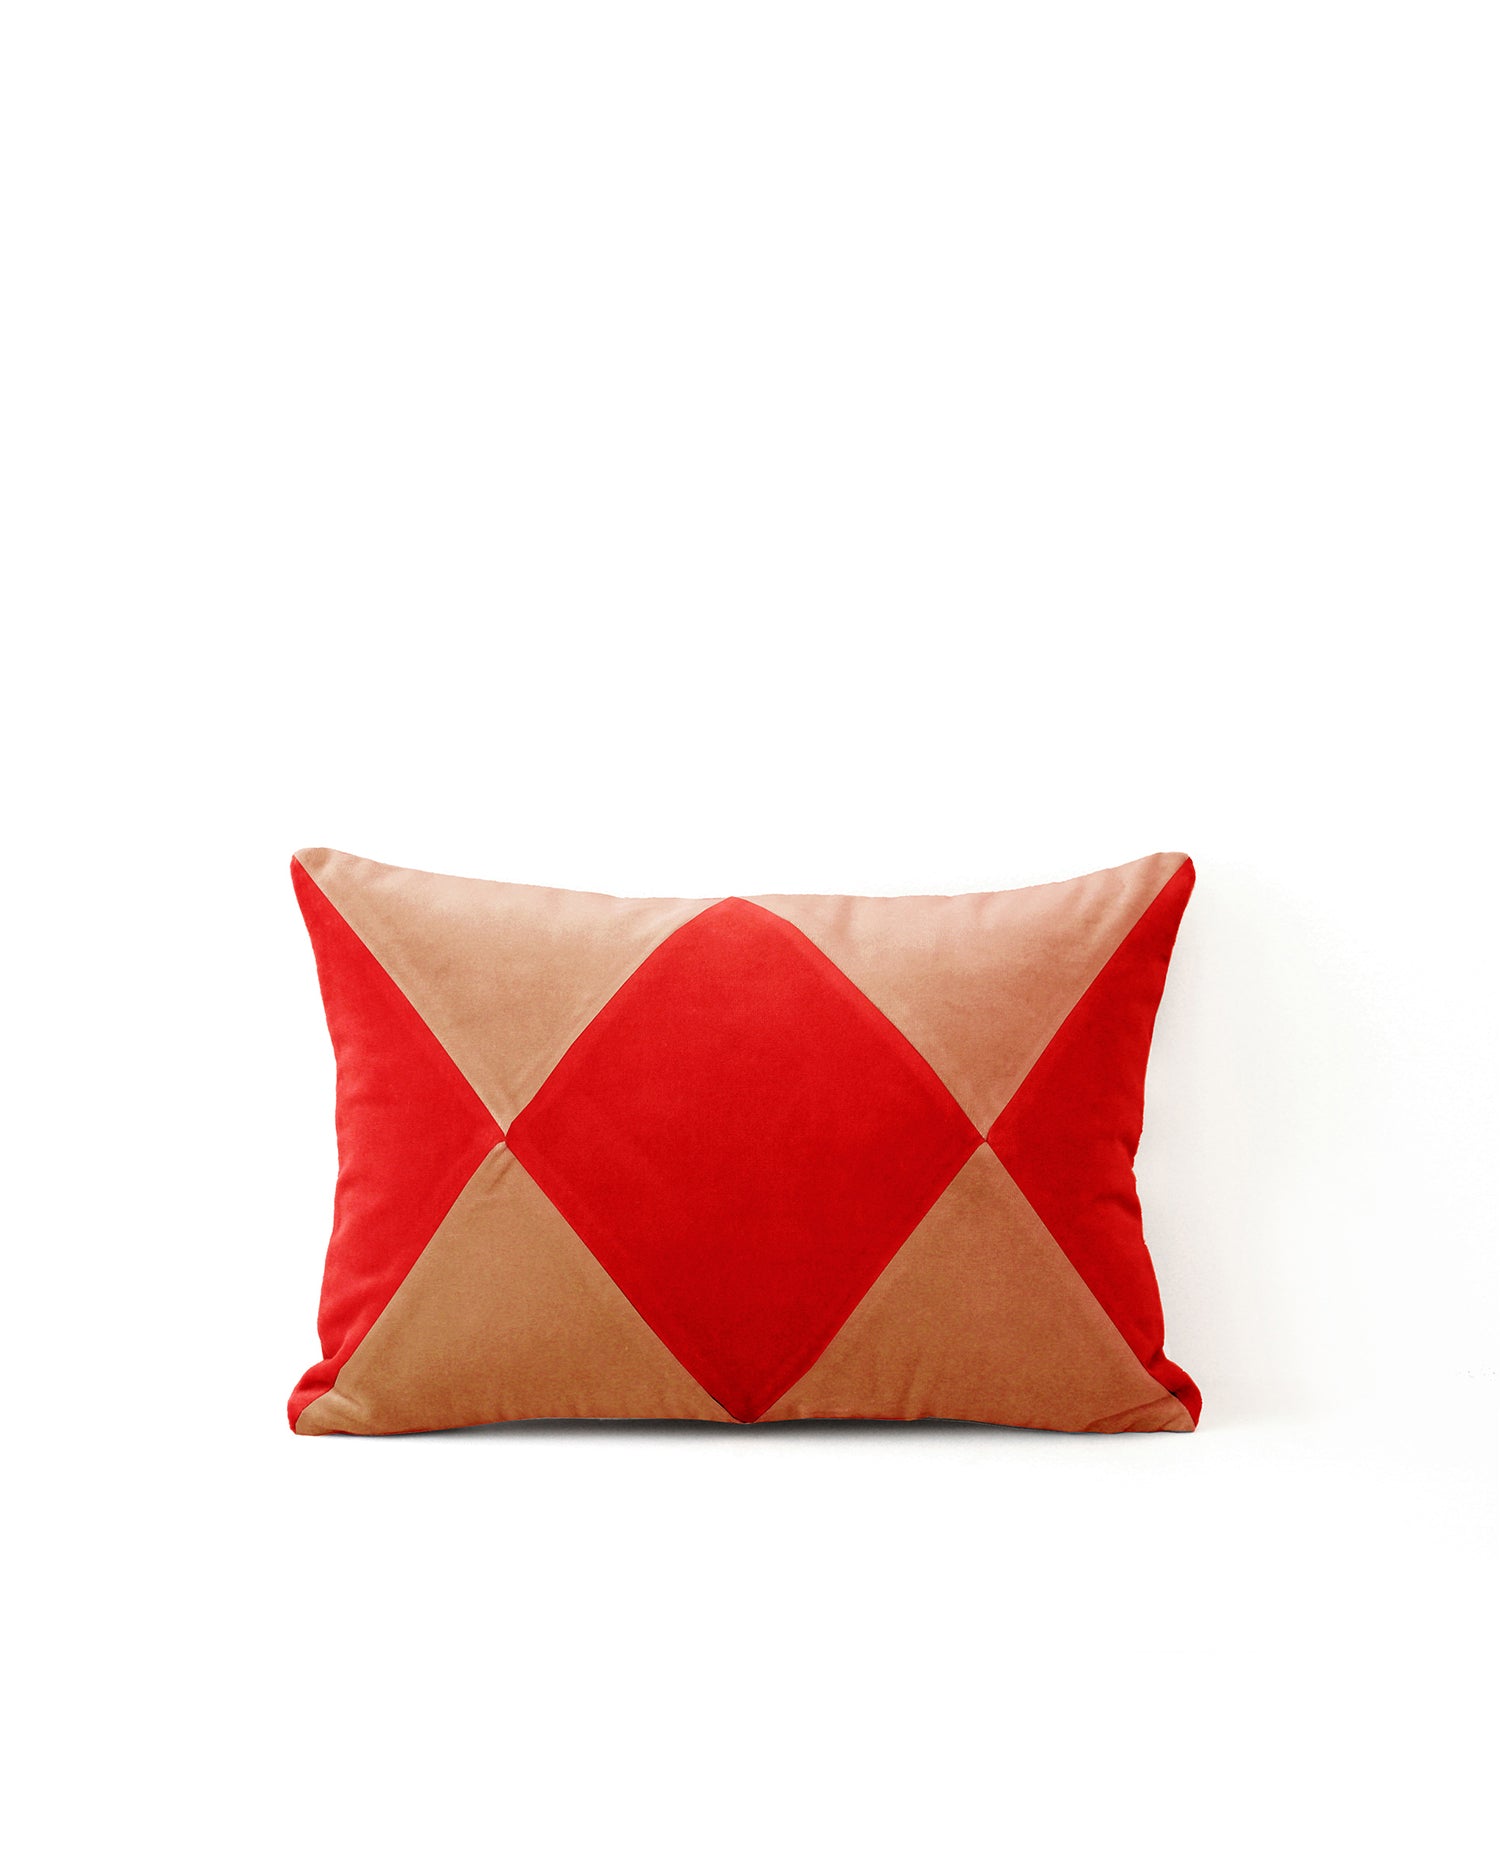 red brown Luxury Velvet Pillow handmade with cotton velvet by My Friend Paco home accessories